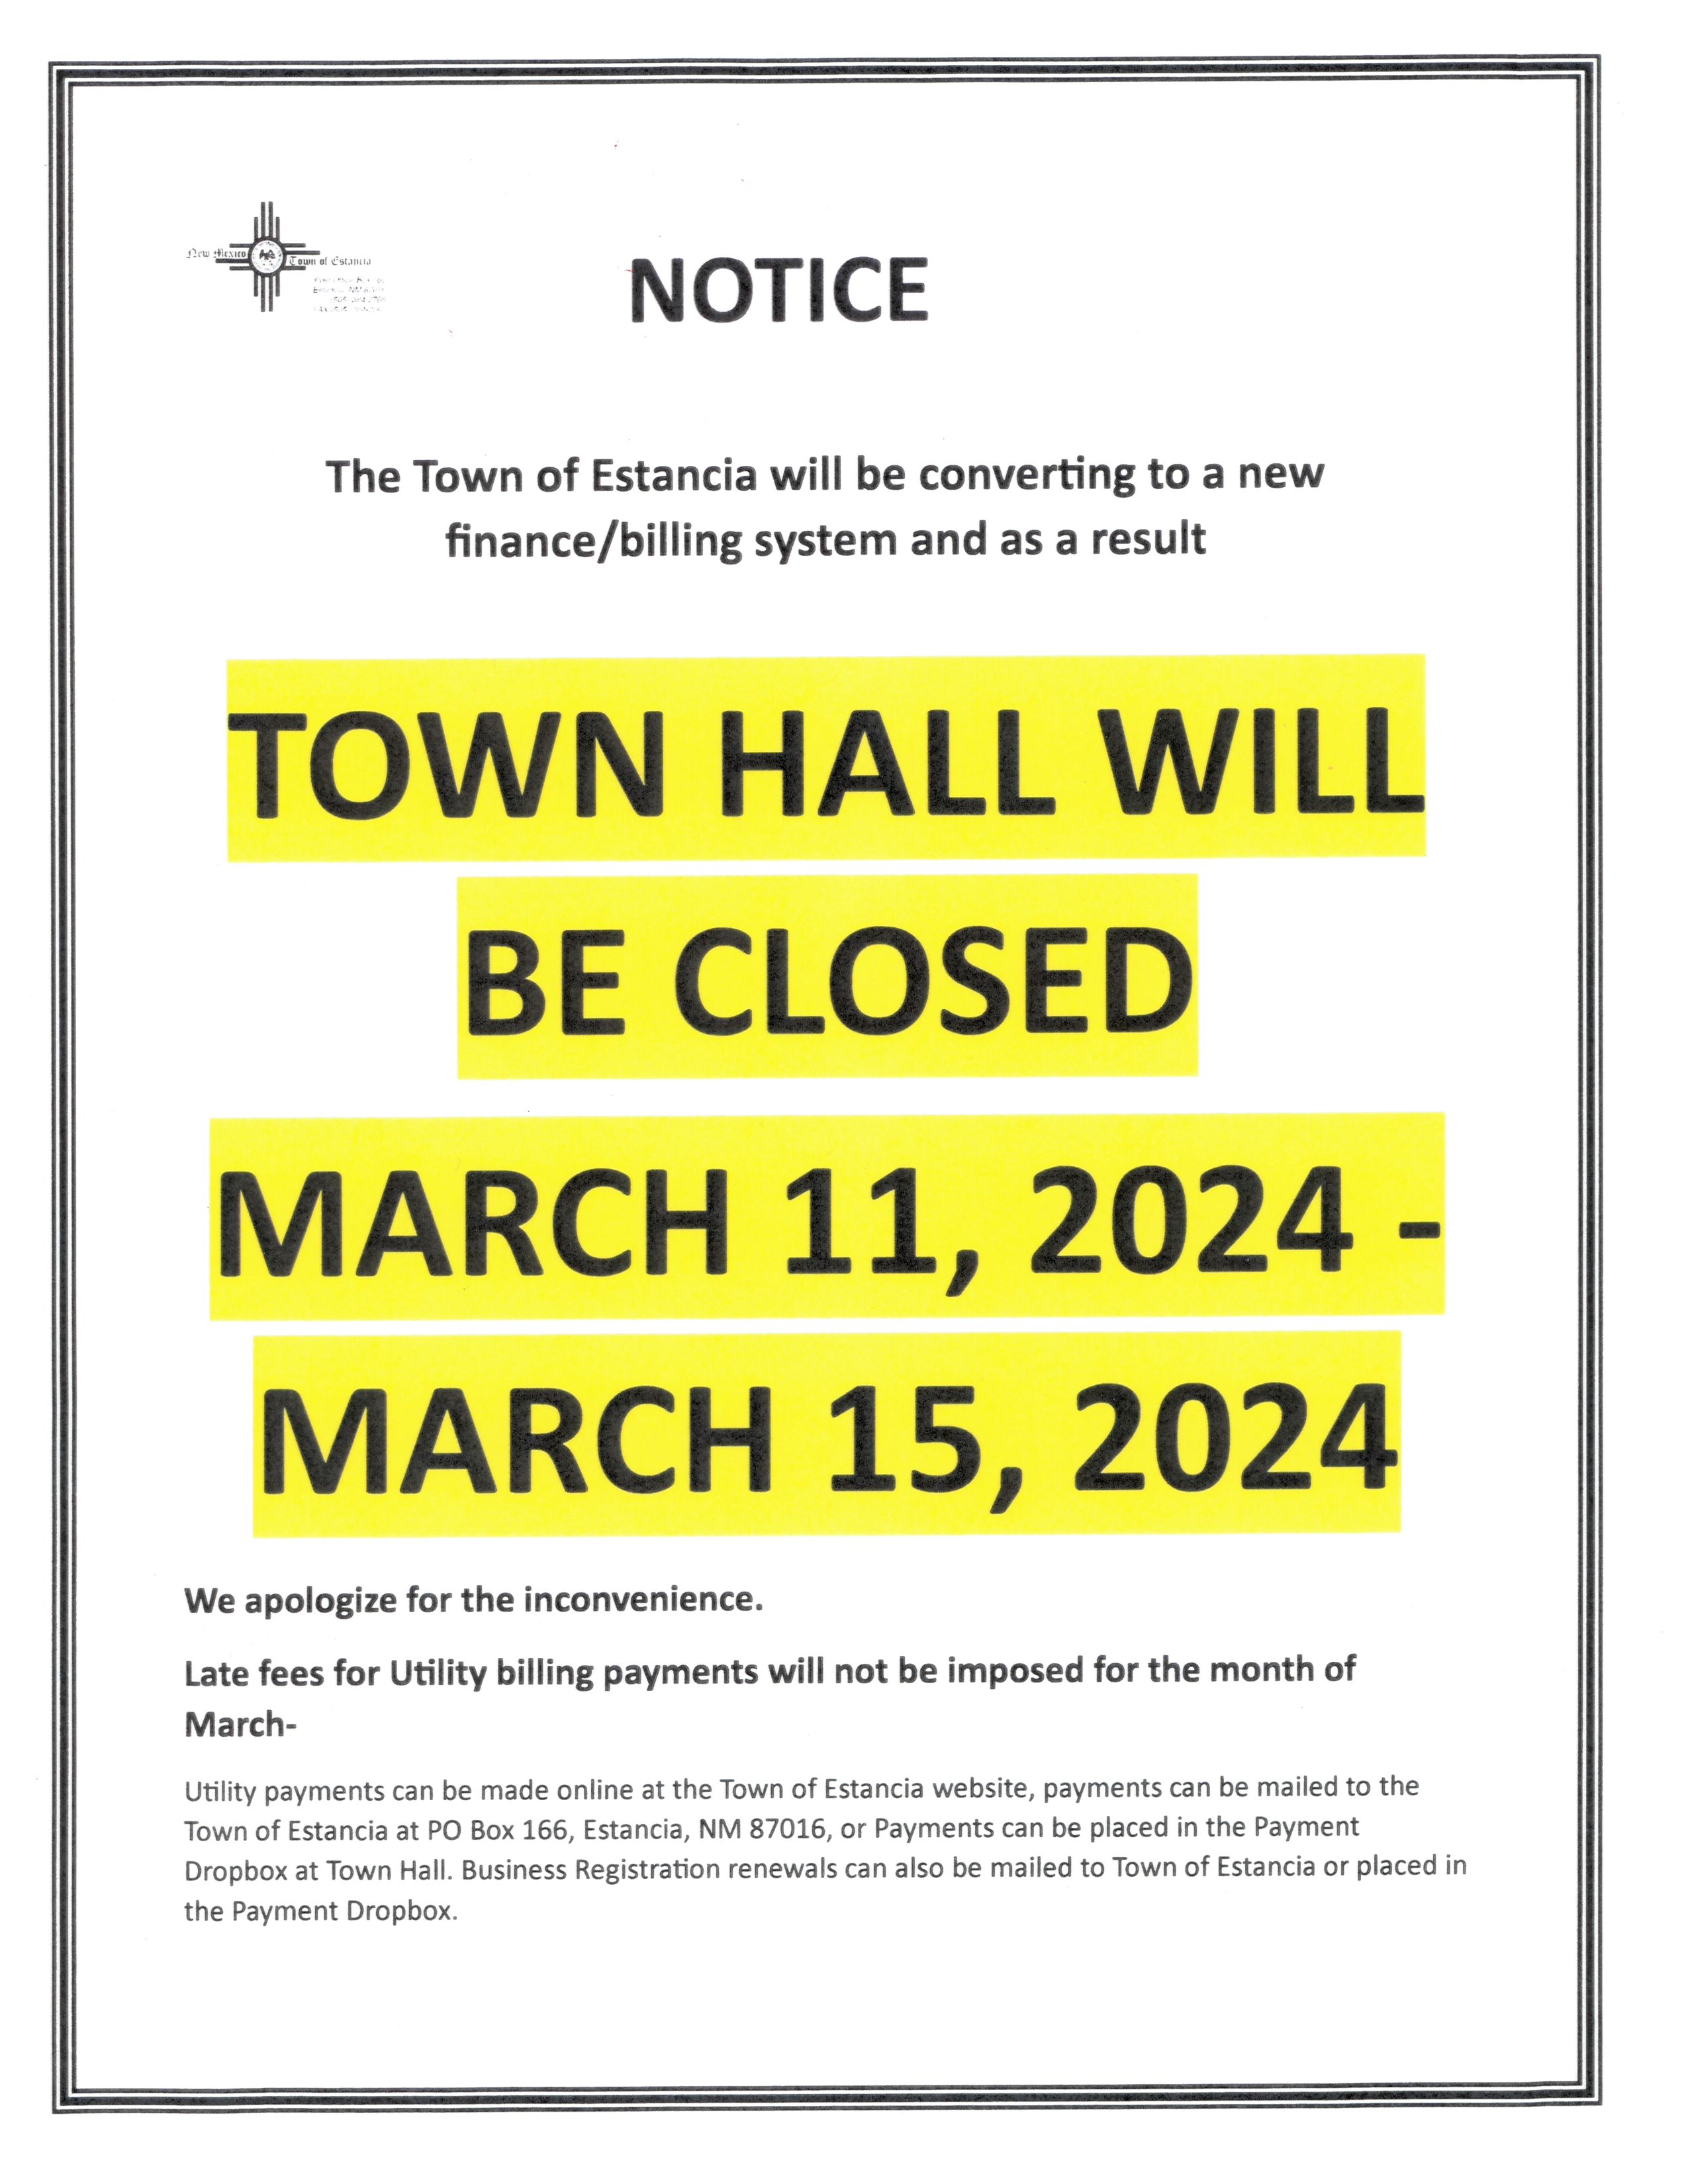 Town Hall closed 03/11 - 15 image